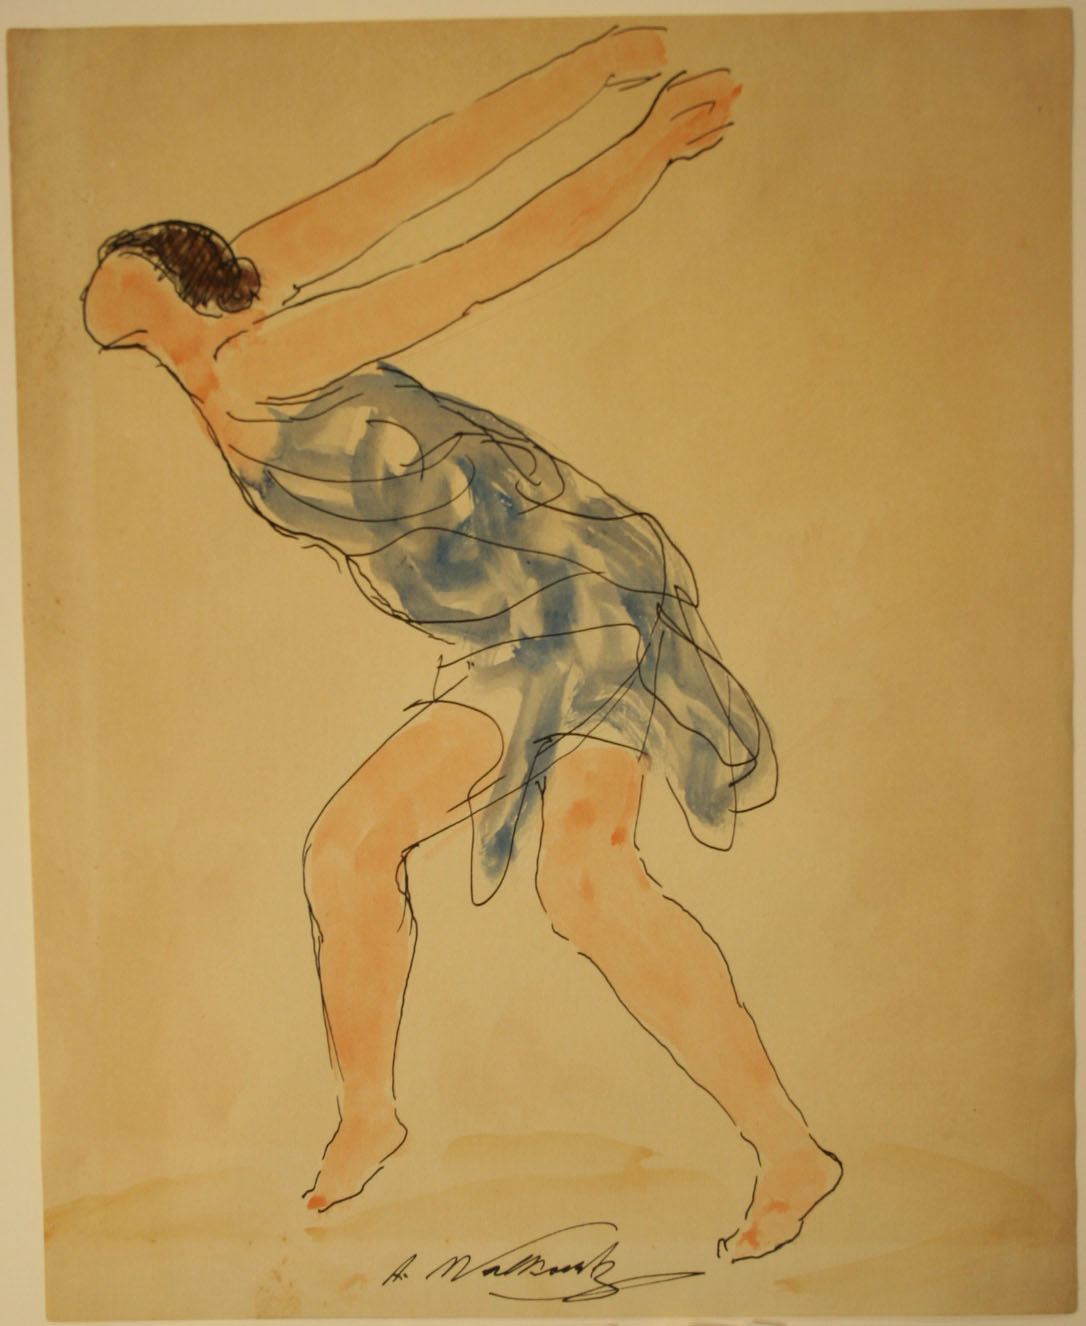 Abraham Walkowitz (American, 1878-1965), [<i>Isadora Duncan Study 03</i>], 20th c., ink, watercolor, graphite. Museums Collections, Gift of Ms. Virginia Zabriskie